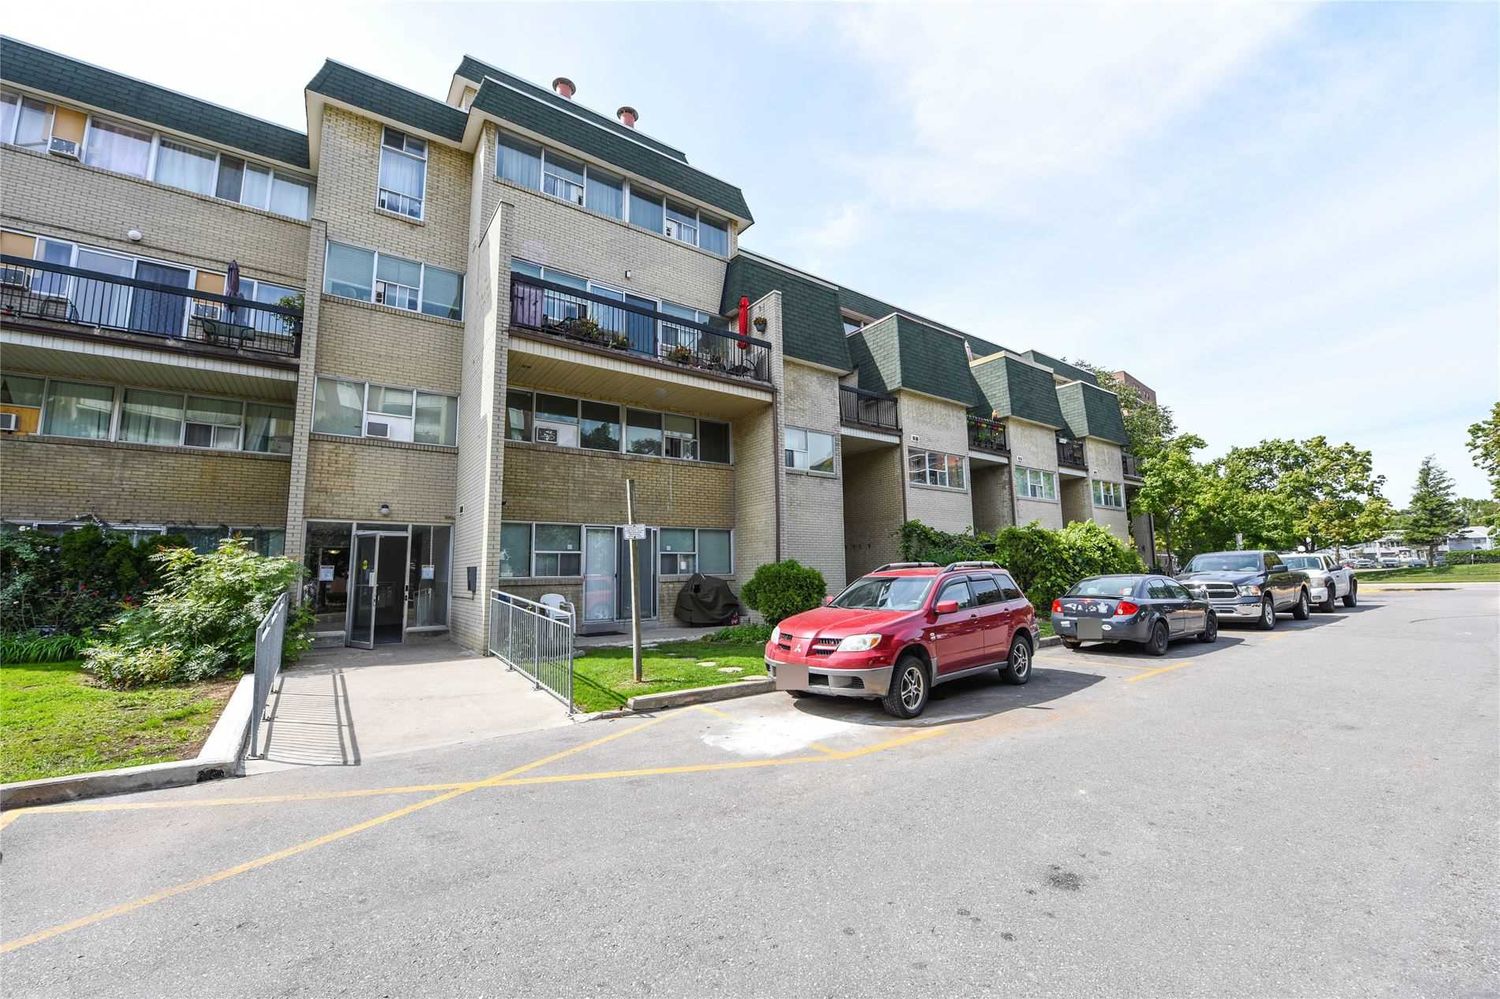 1624 Bloor Street. Mississauga Terrace Condos is located in  Mississauga, Toronto - image #3 of 3